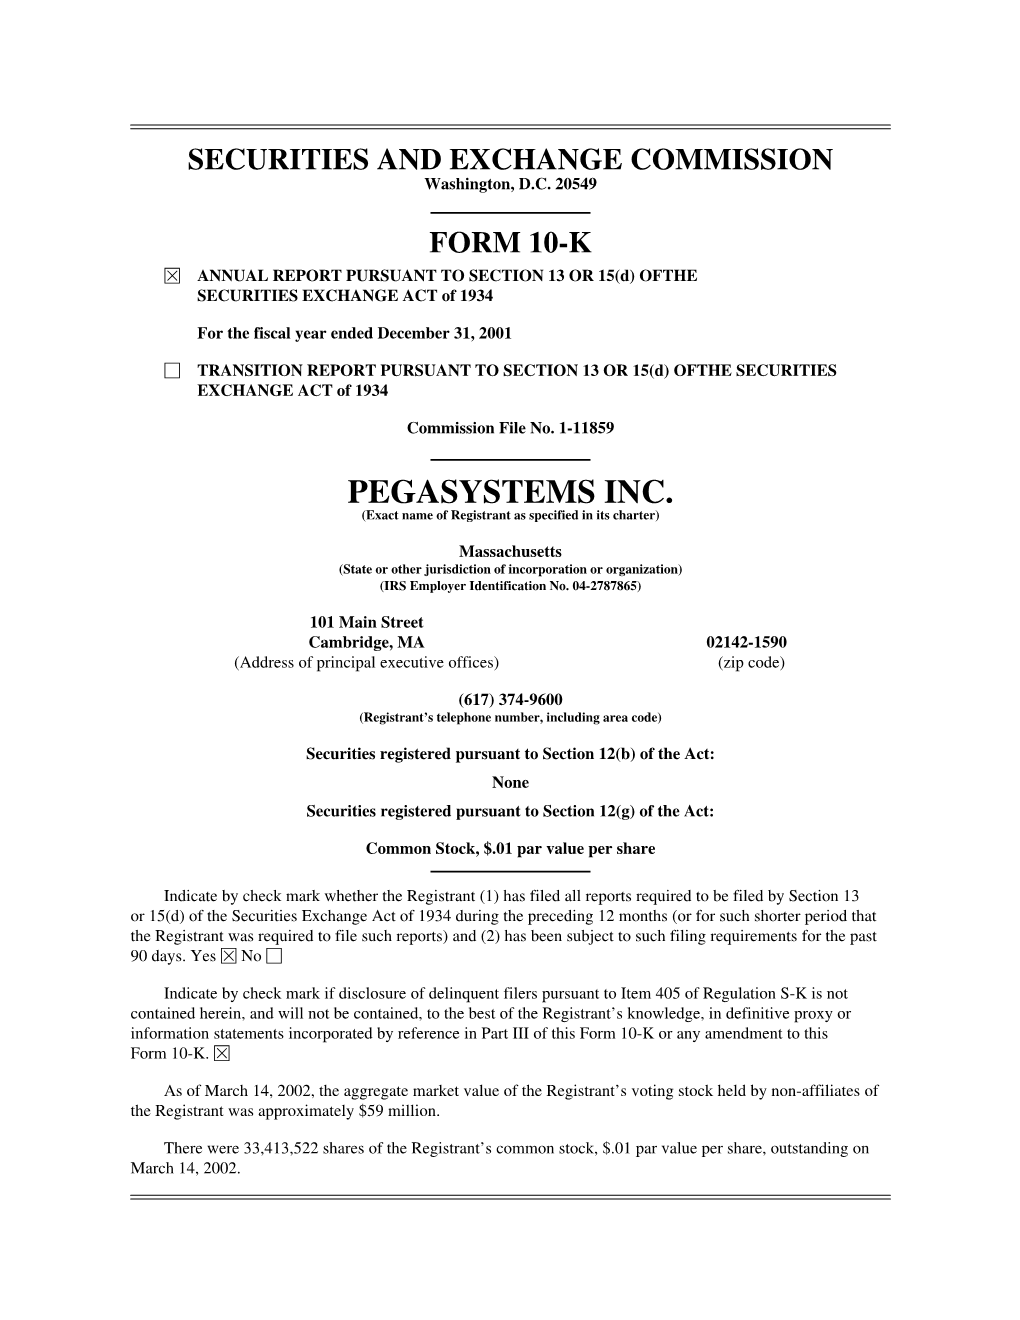 PEGASYSTEMS INC. (Exact Name of Registrant As Specified in Its Charter)